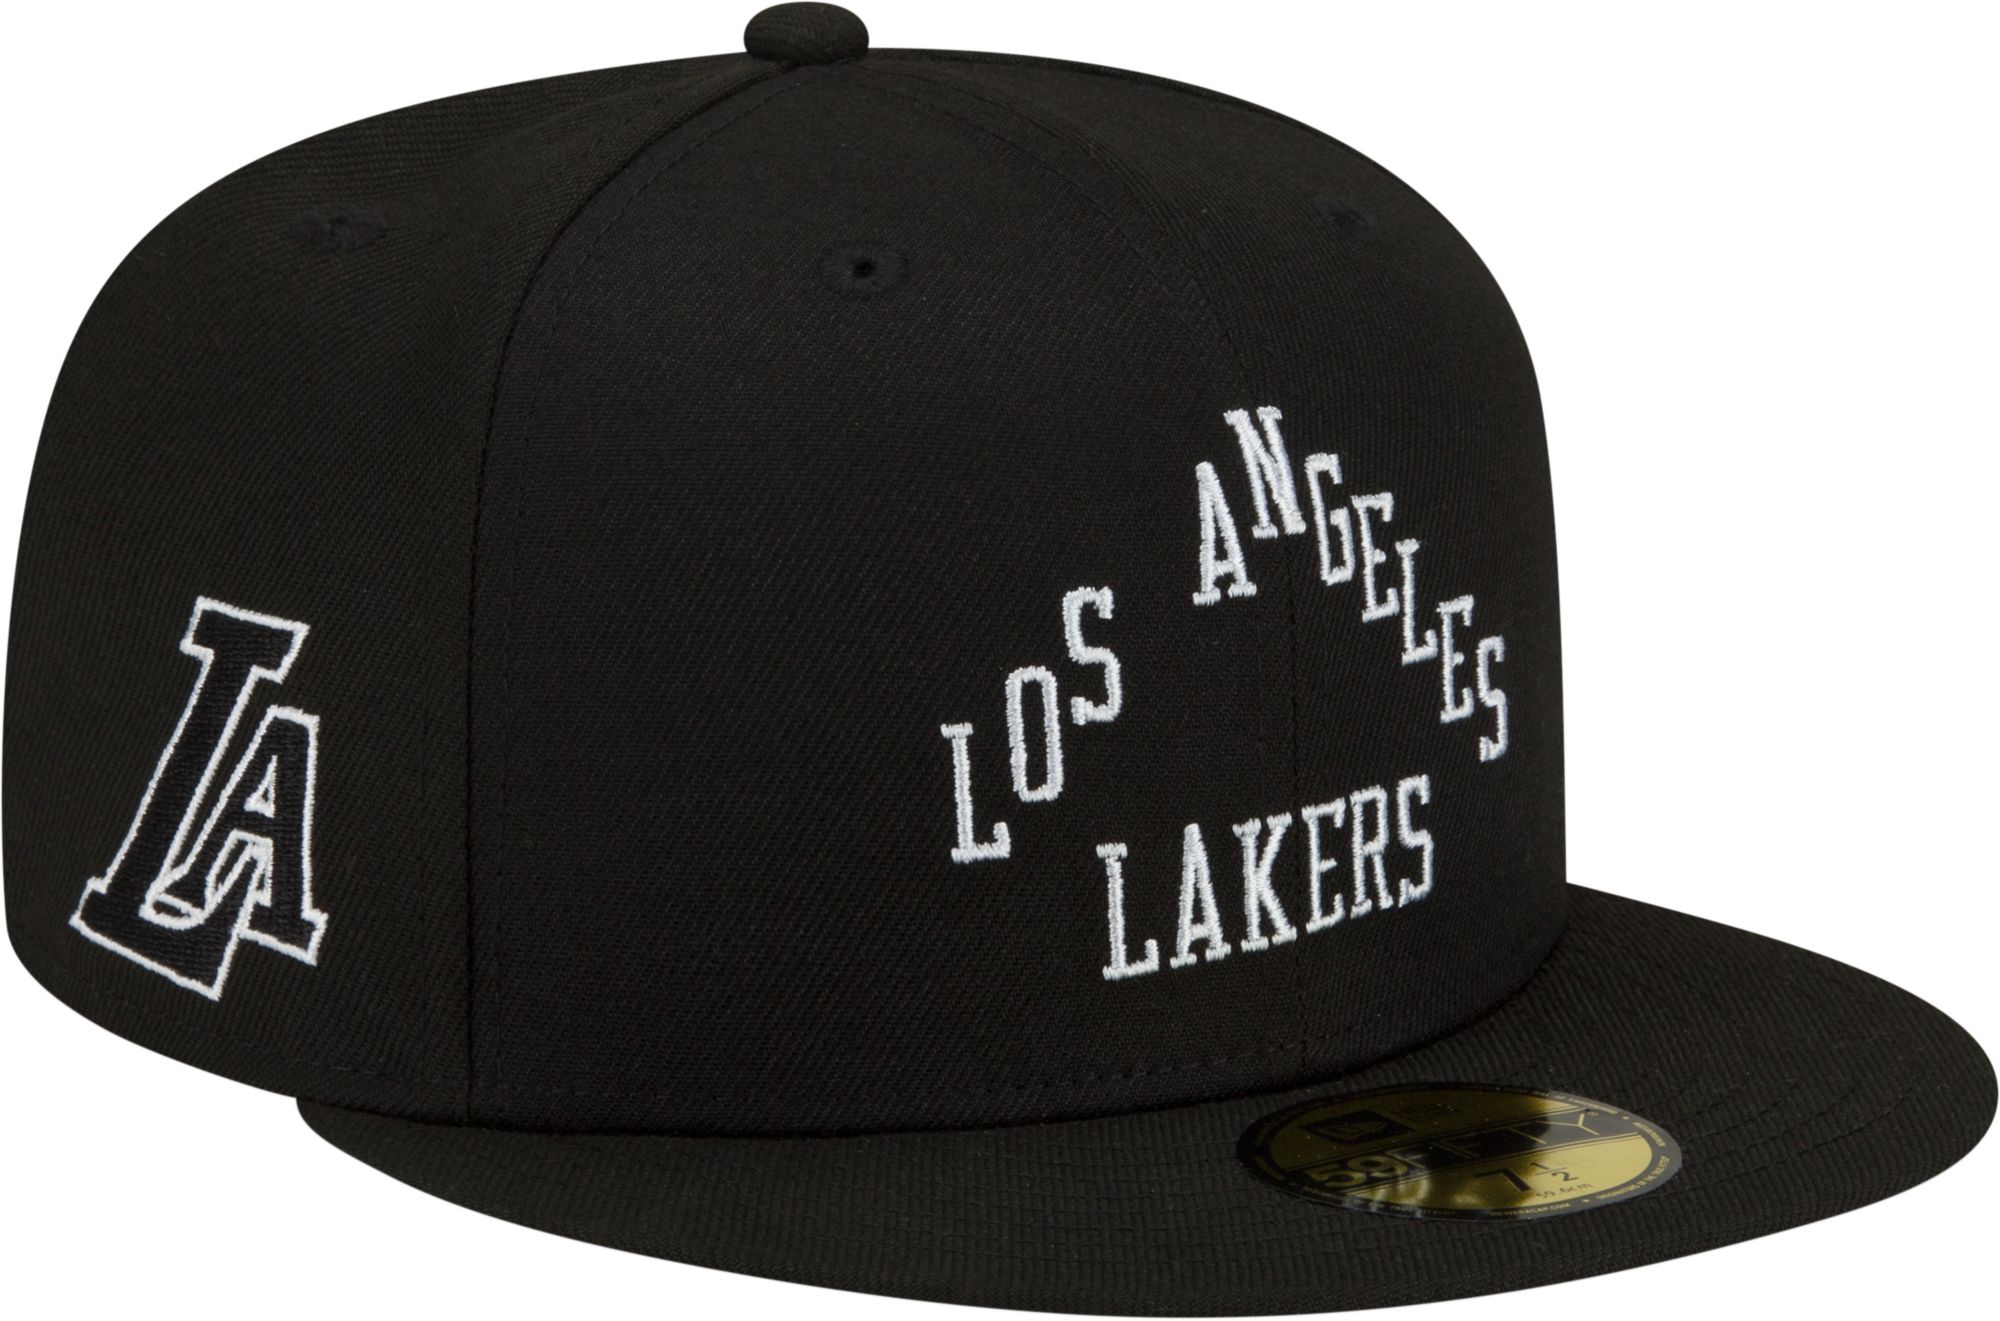 lakers city edition hat 2021